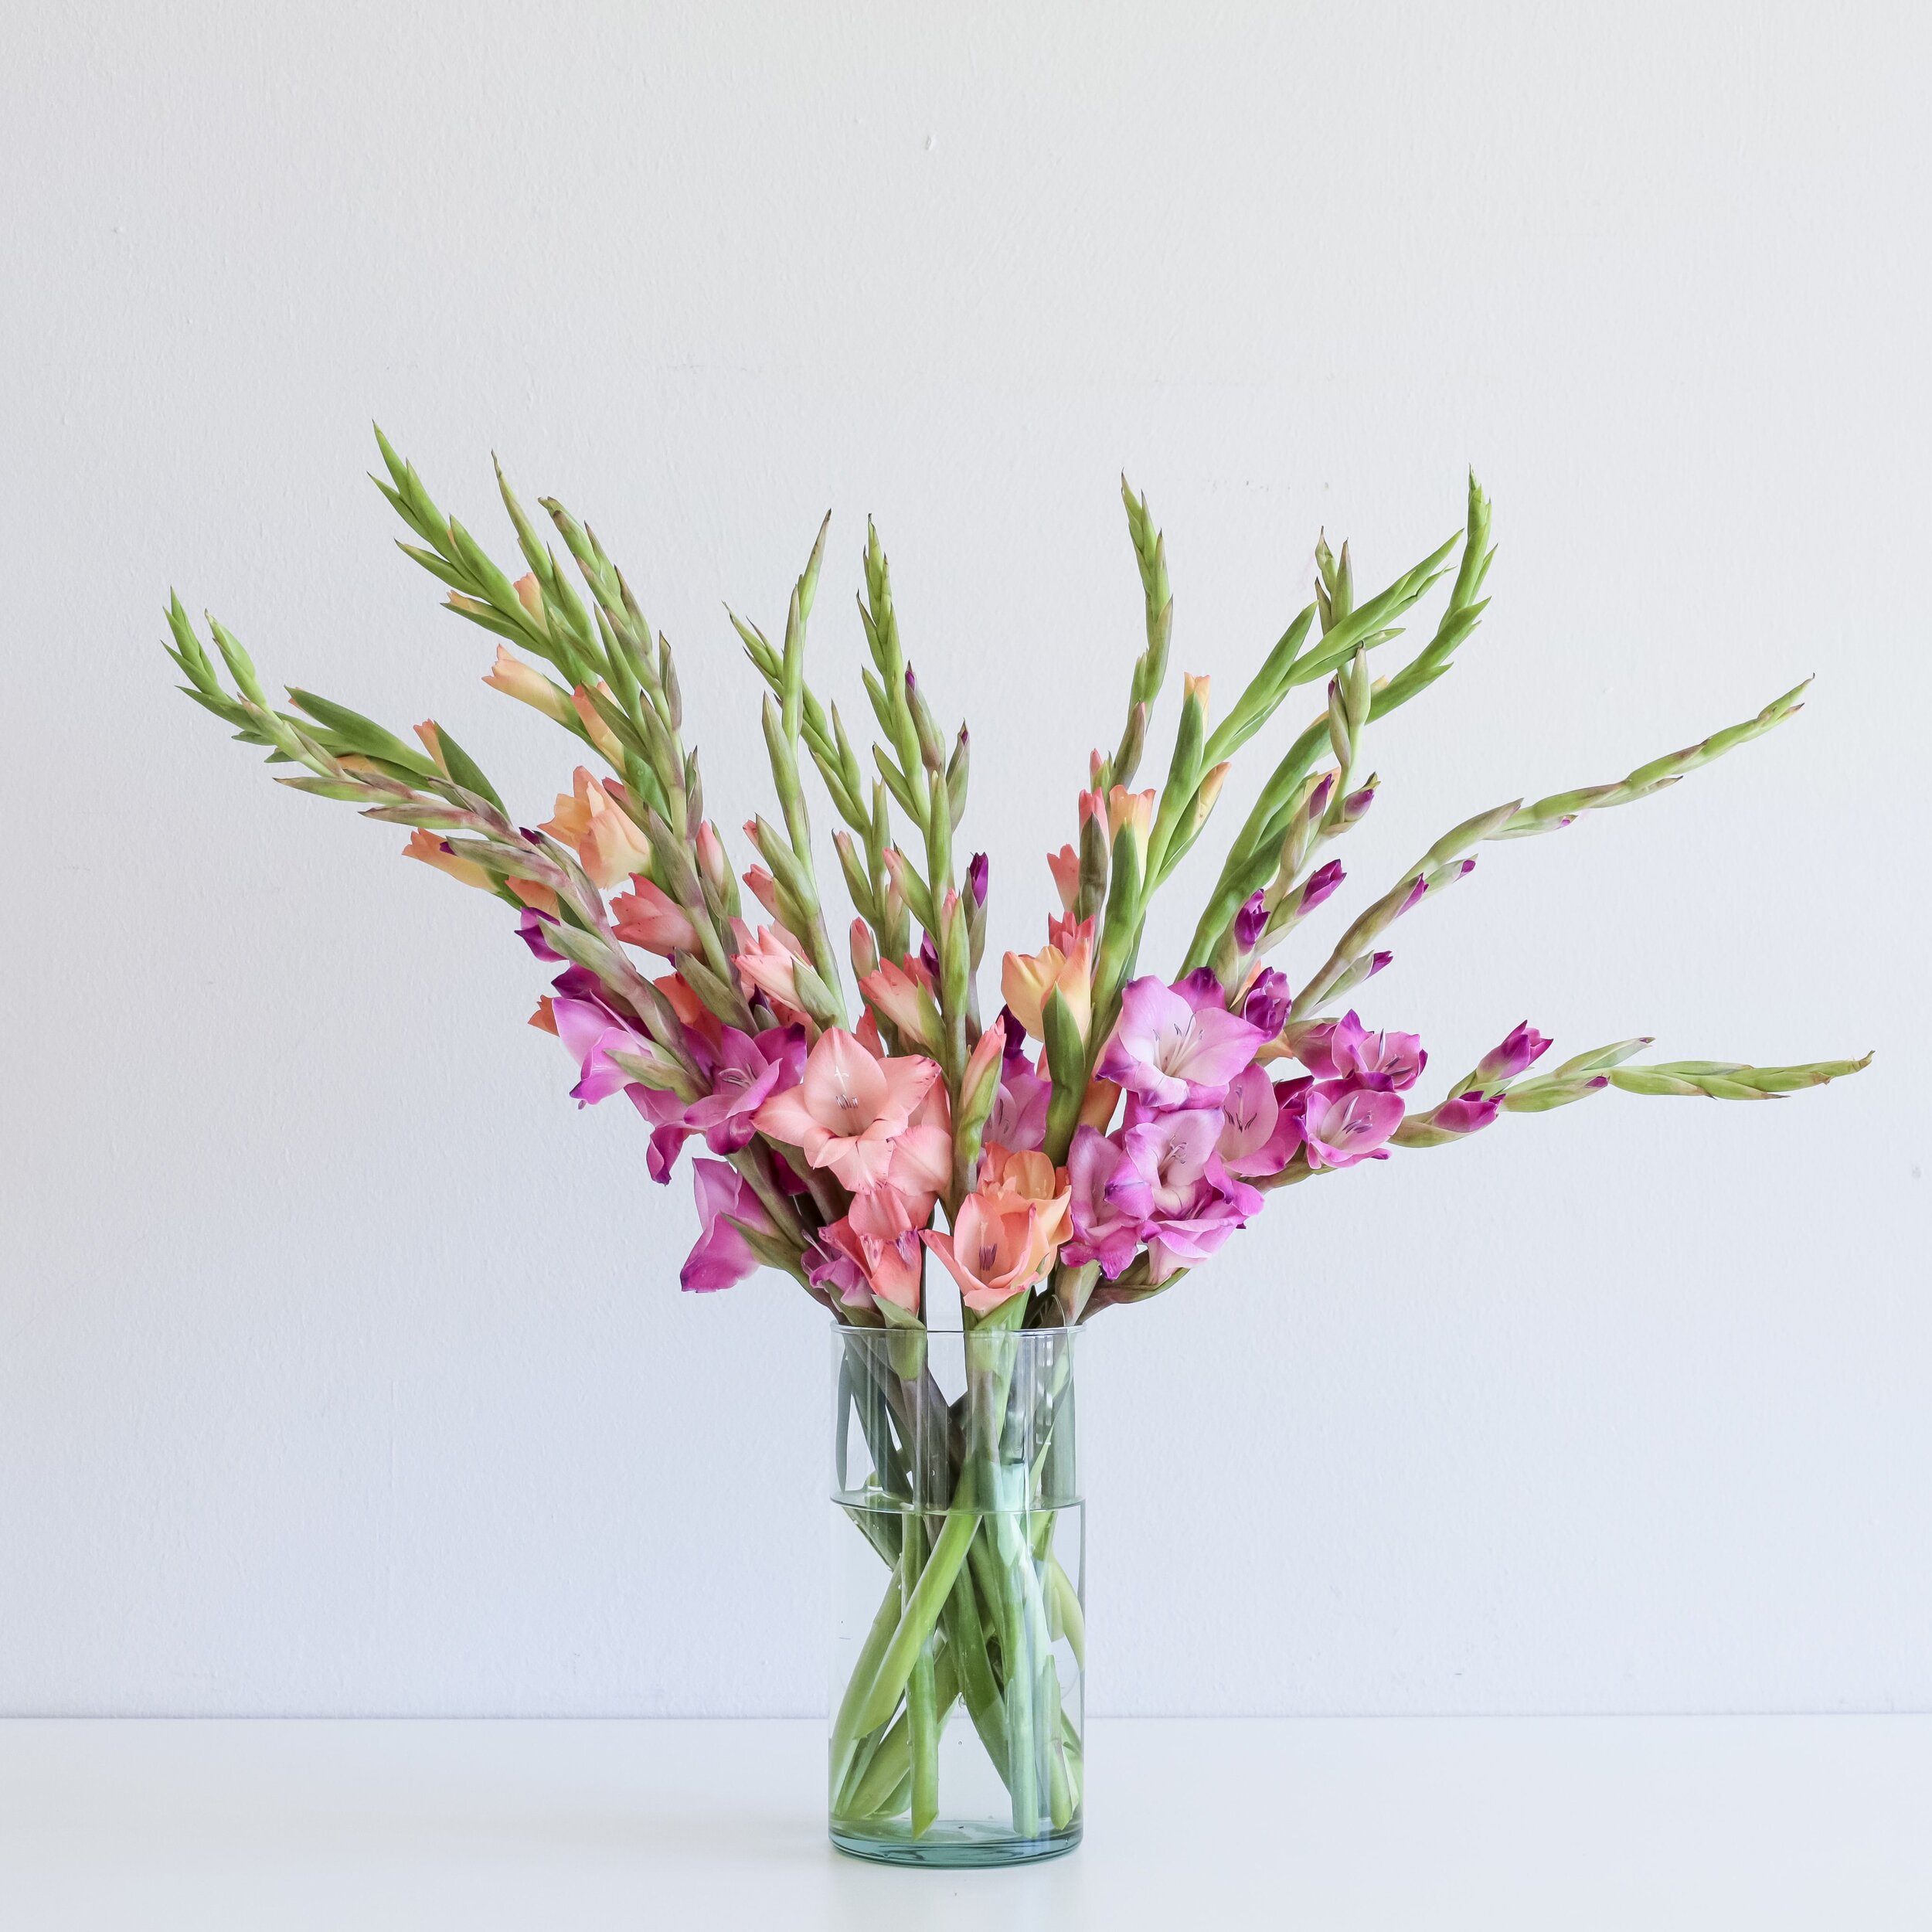 A fower arrangement of light and dark pink gladiolus stems in a clear vase with water